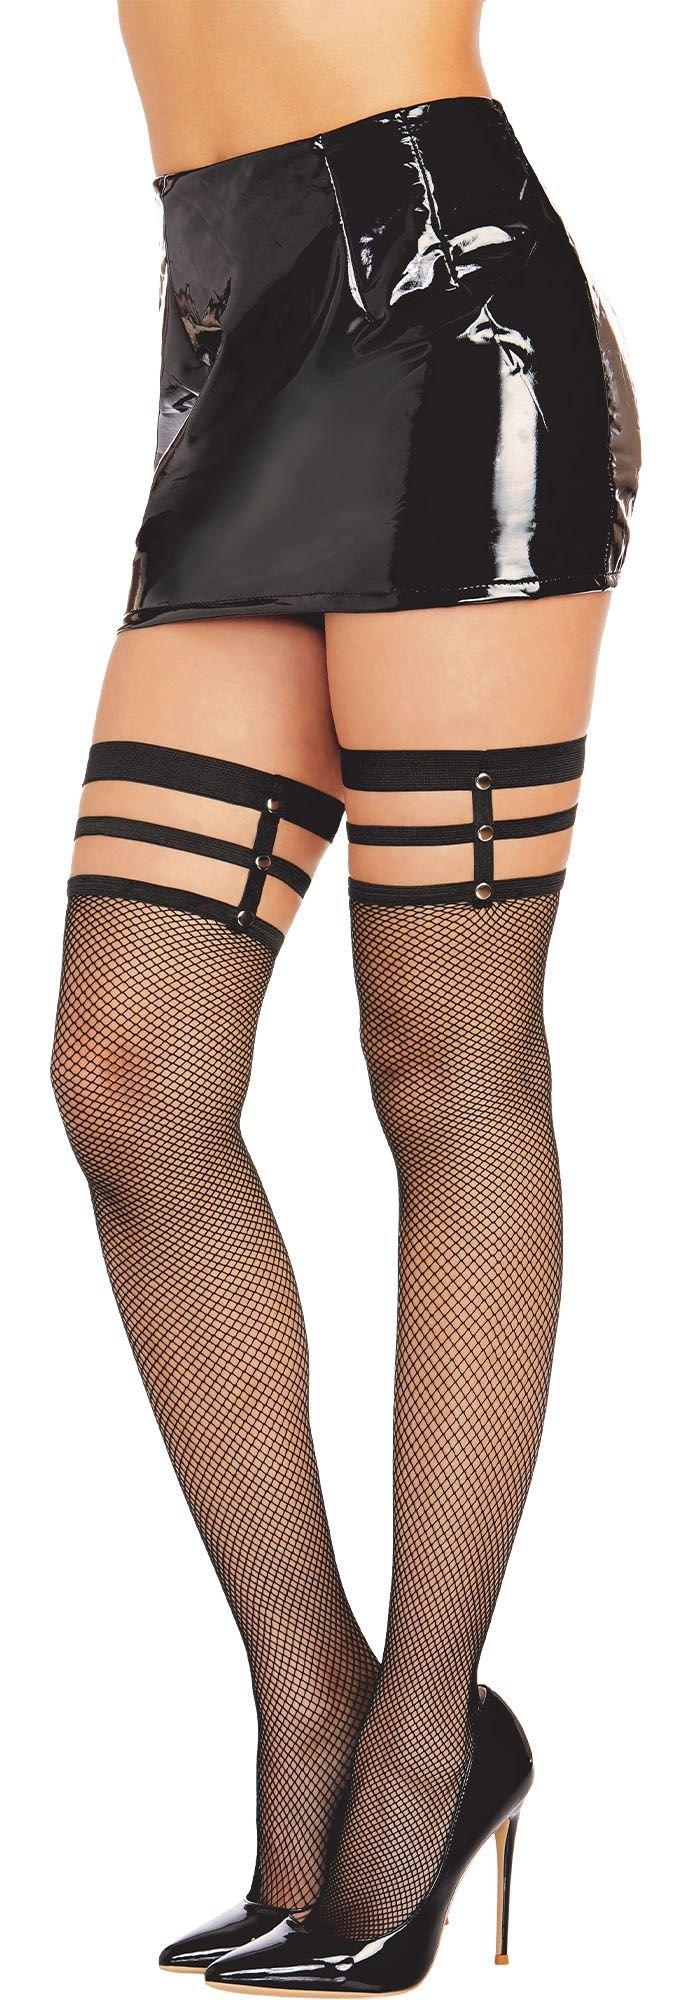 Adult Garter Belt Set with Fishnet Stocking Tights, Black, One Size,  Wearable Costume Accessory for Halloween